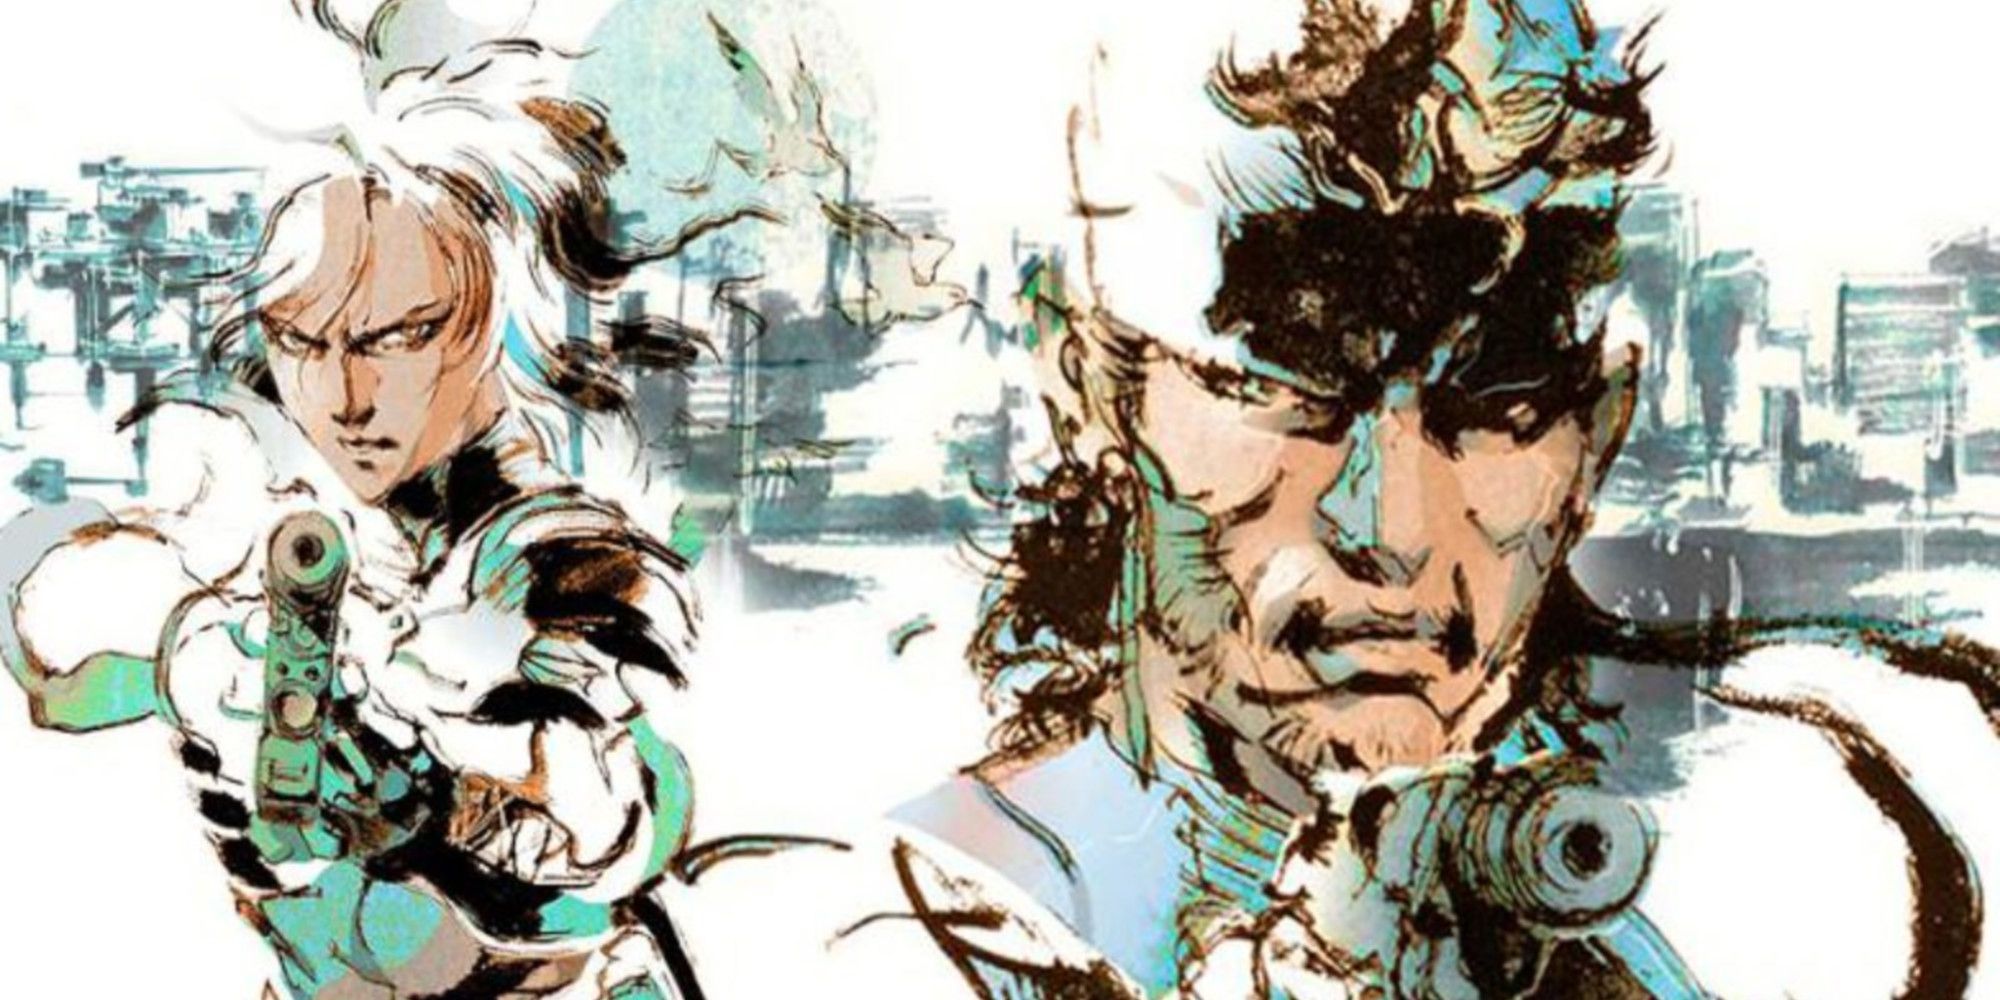 Metal Gear Solid 2: Official art showing Raiden and Snake